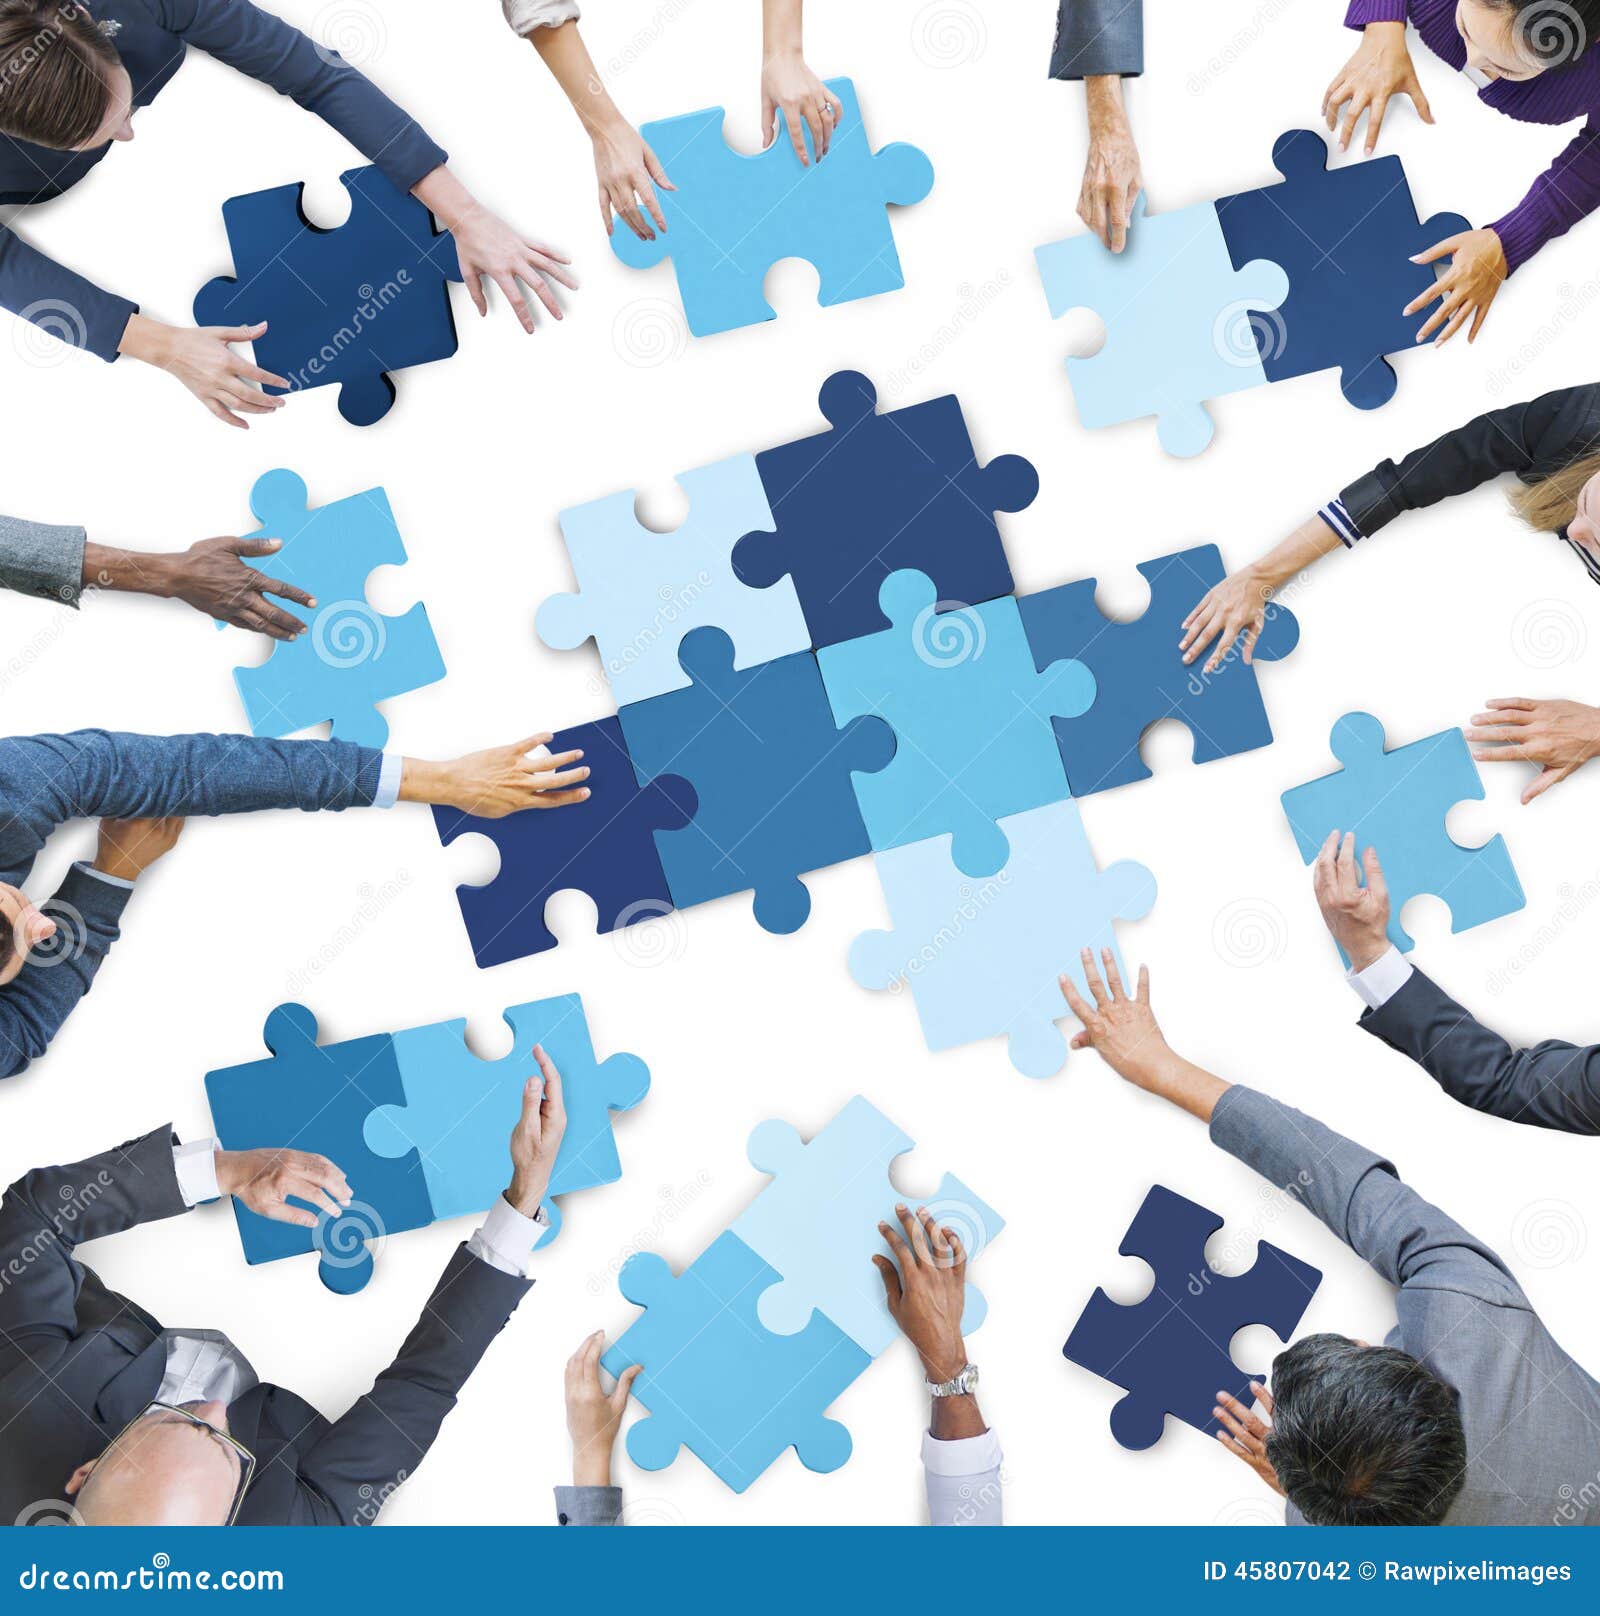 aerial view of business people piecing puzzle pieces